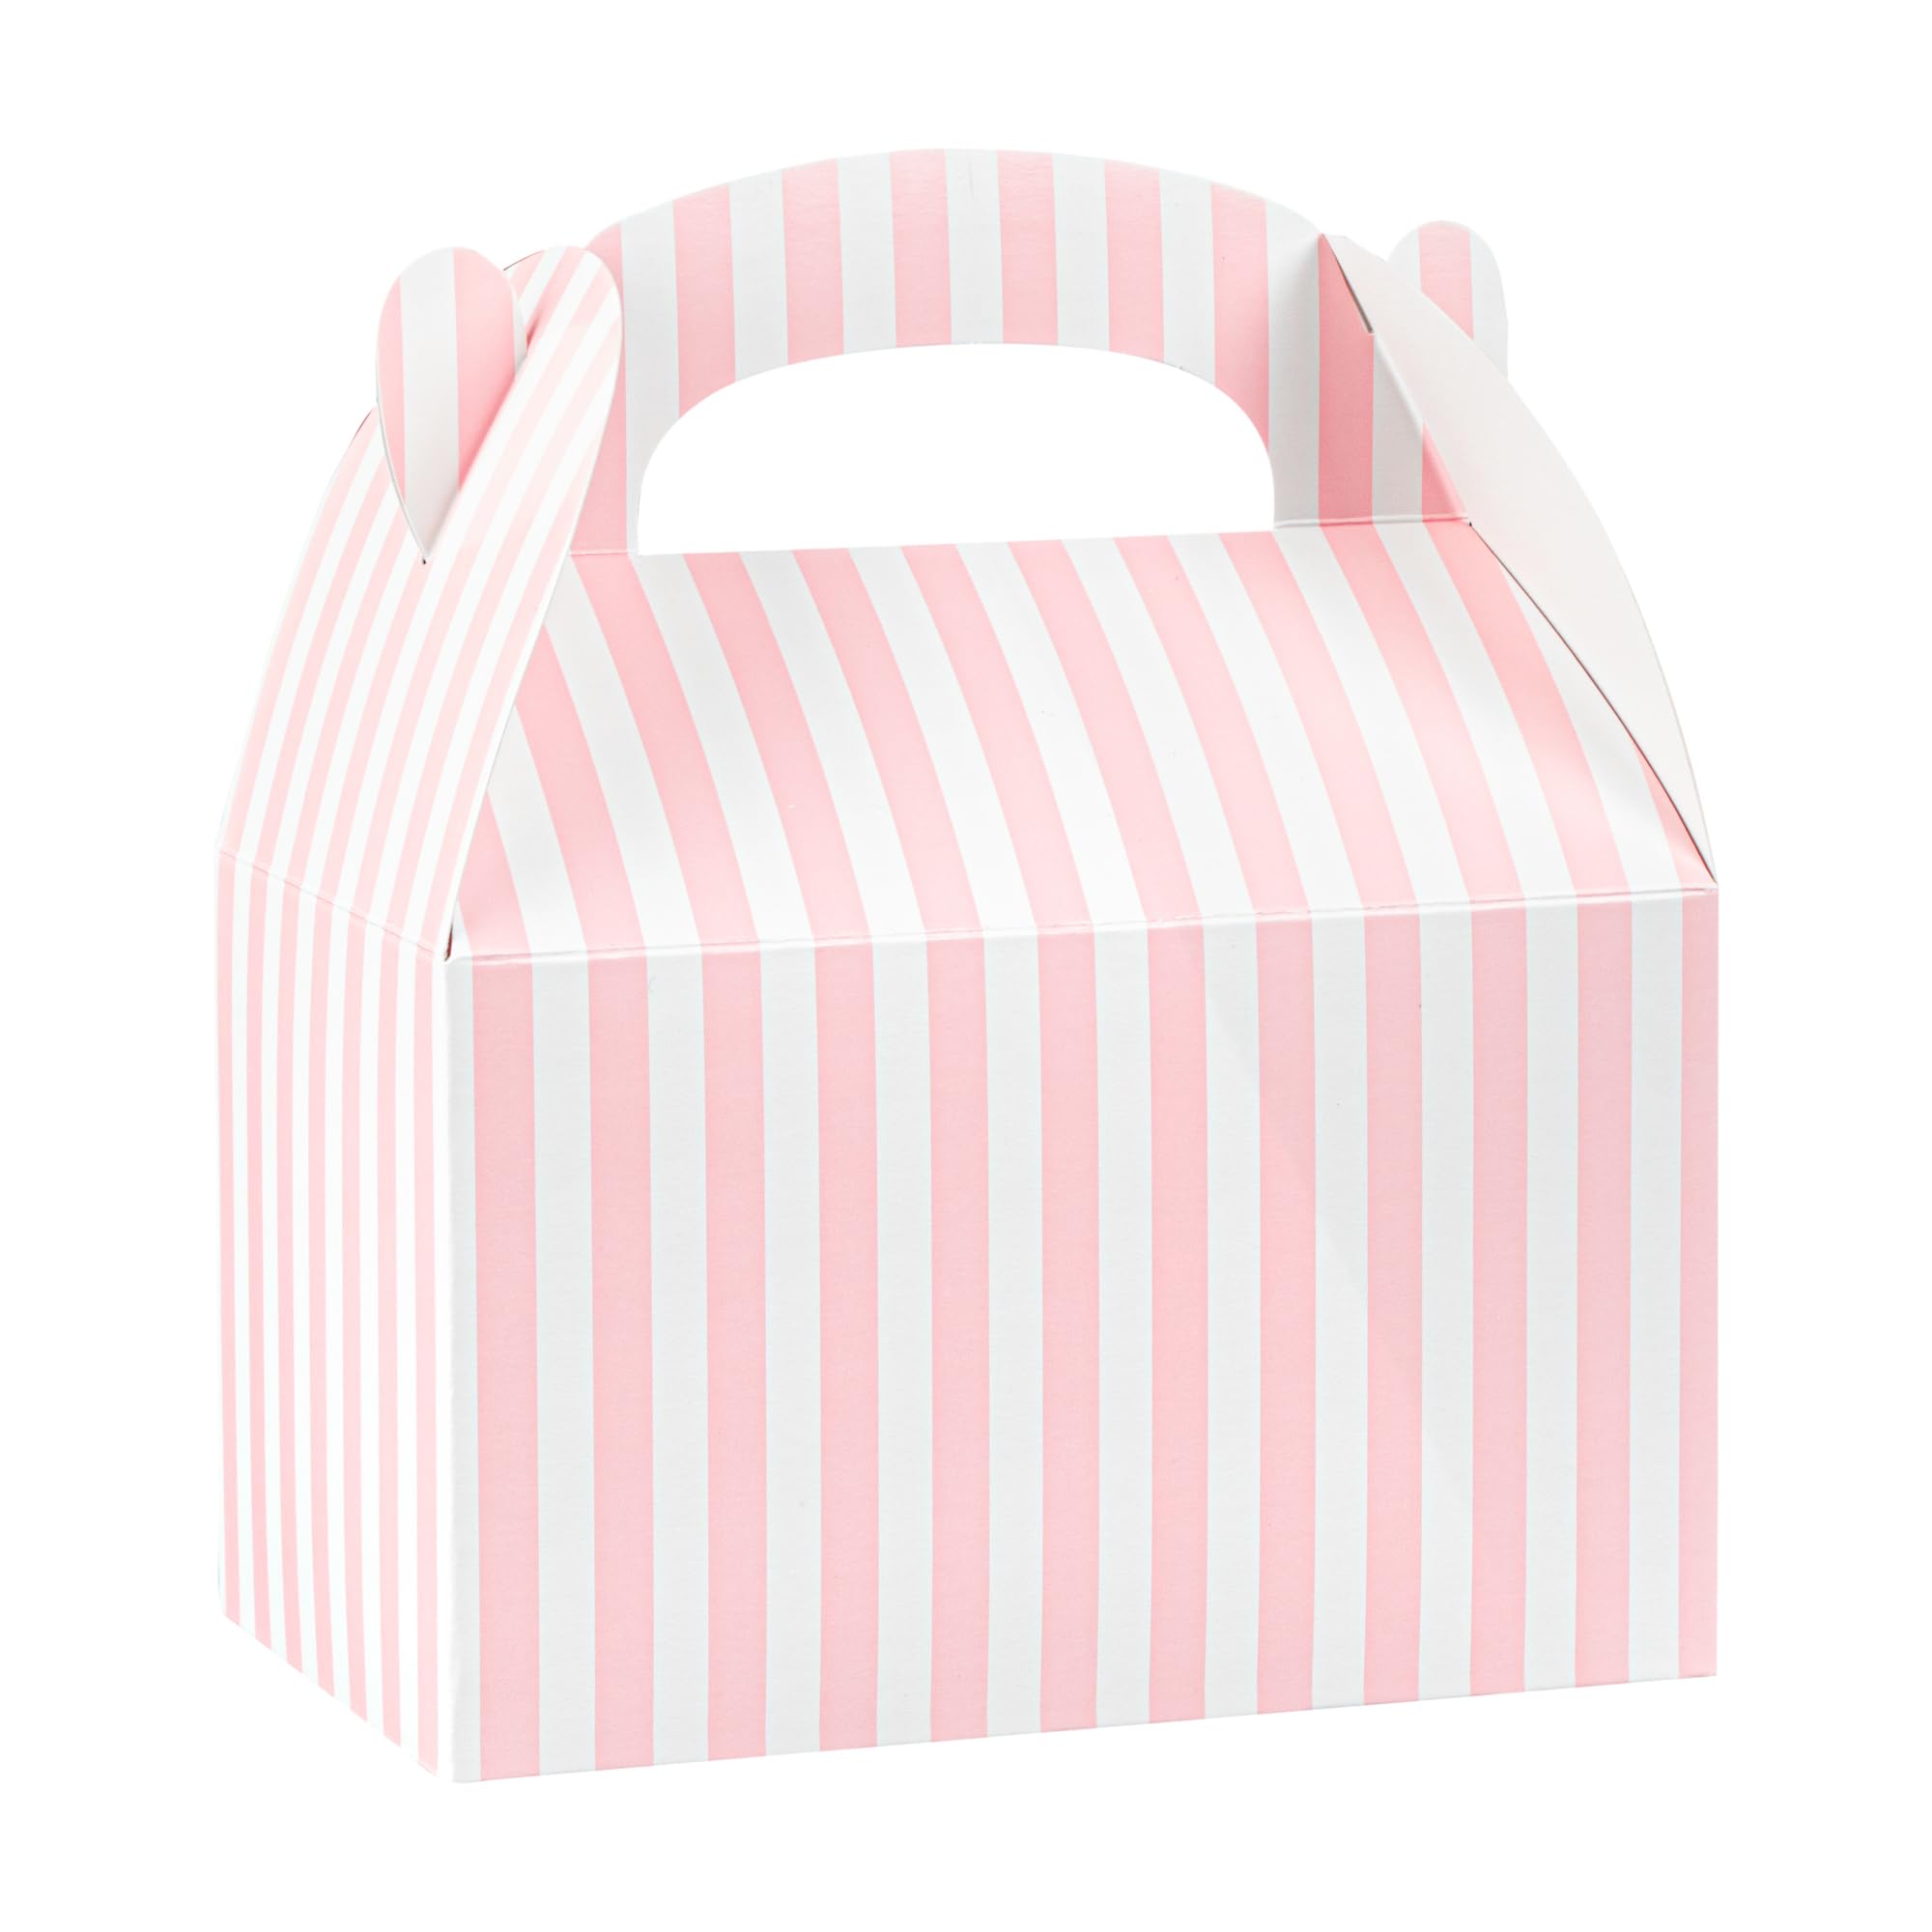 Bio Tek 6 x 3.5 x 3.5 Inch Gable Boxes For Party Favors, 25 Durable Gift Treat Boxes - Striped Design, With Built-In Handle, Pink And White Paper Barn Boxes, Disposable, For Parties - Restaurantware